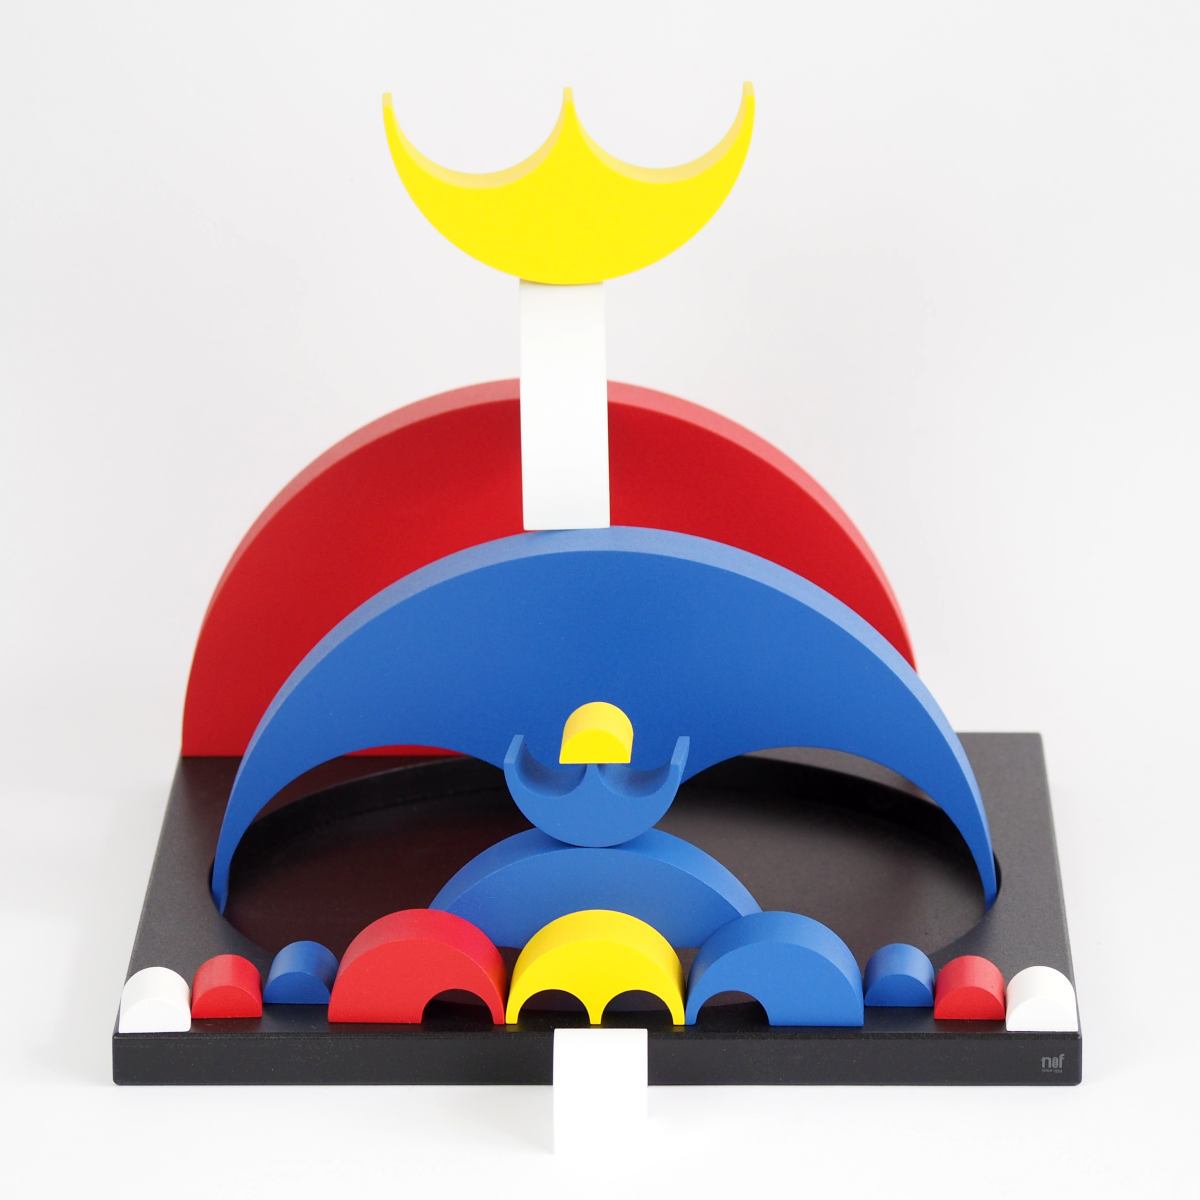 Circino – Original Construction Game by Naef, made of Wood